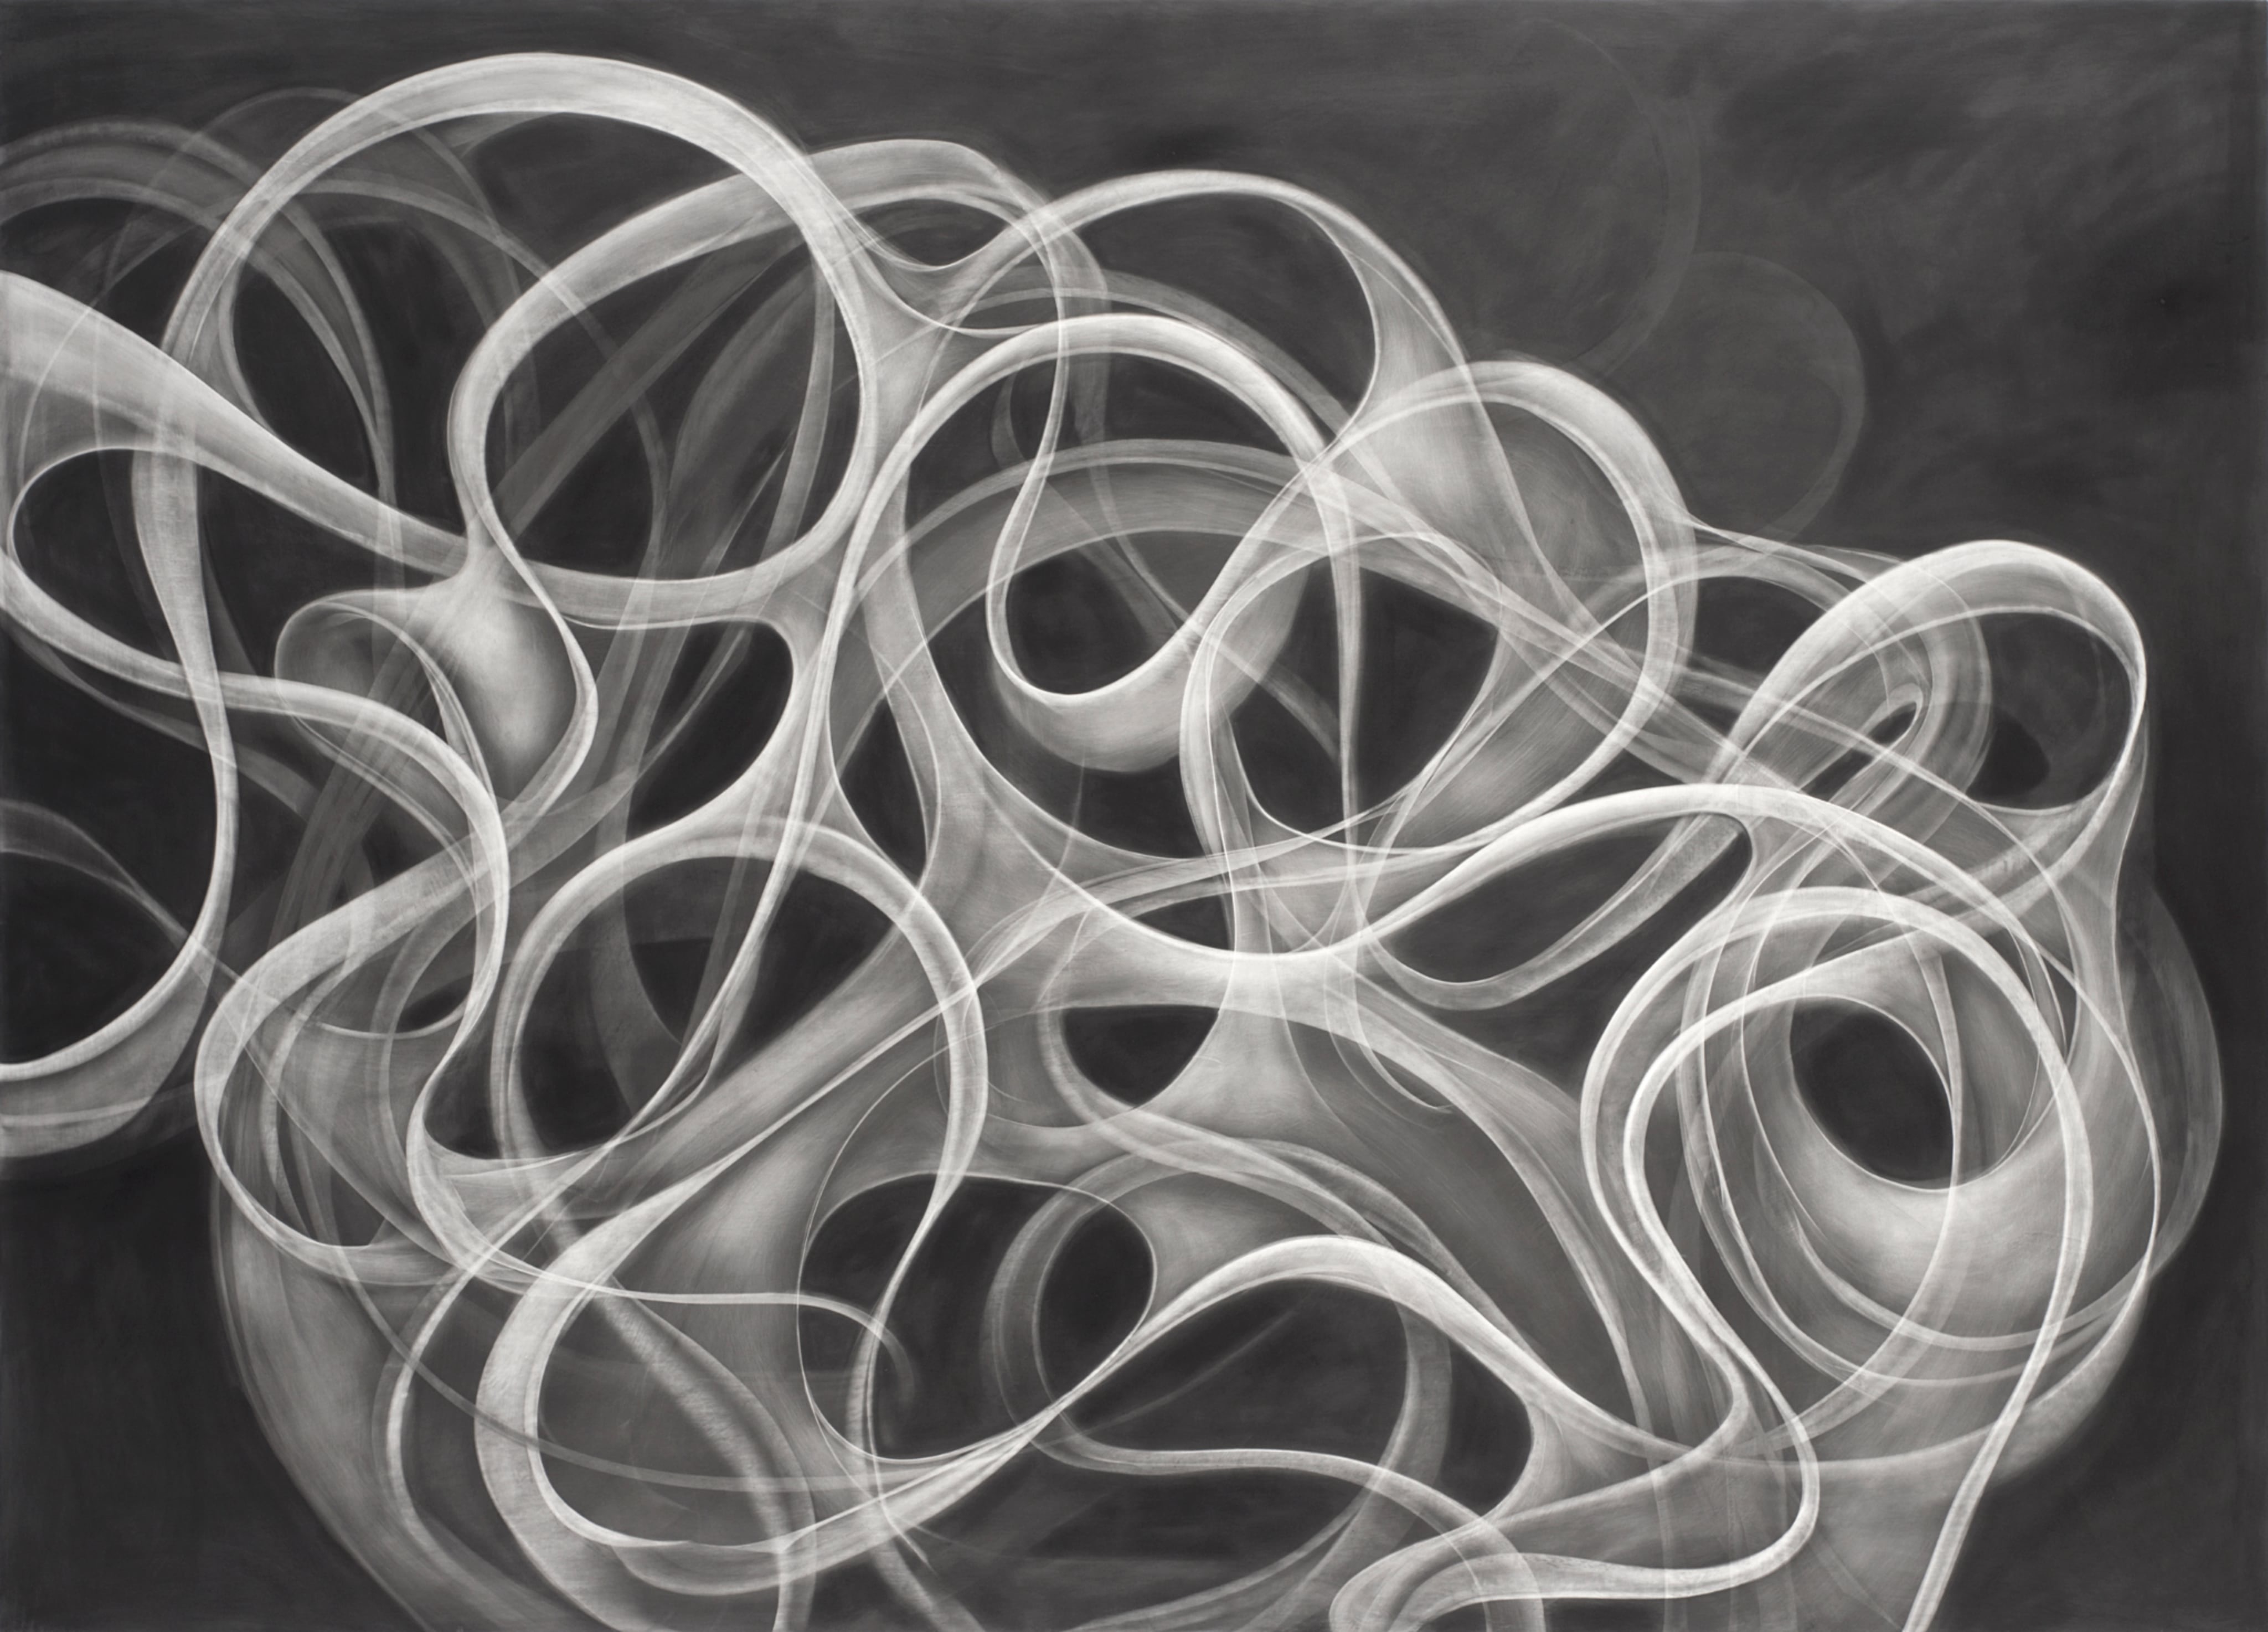 Myrtle, 55 x 76 inches, 42 x 76, oil, alkyd and graphite on linen, 2014